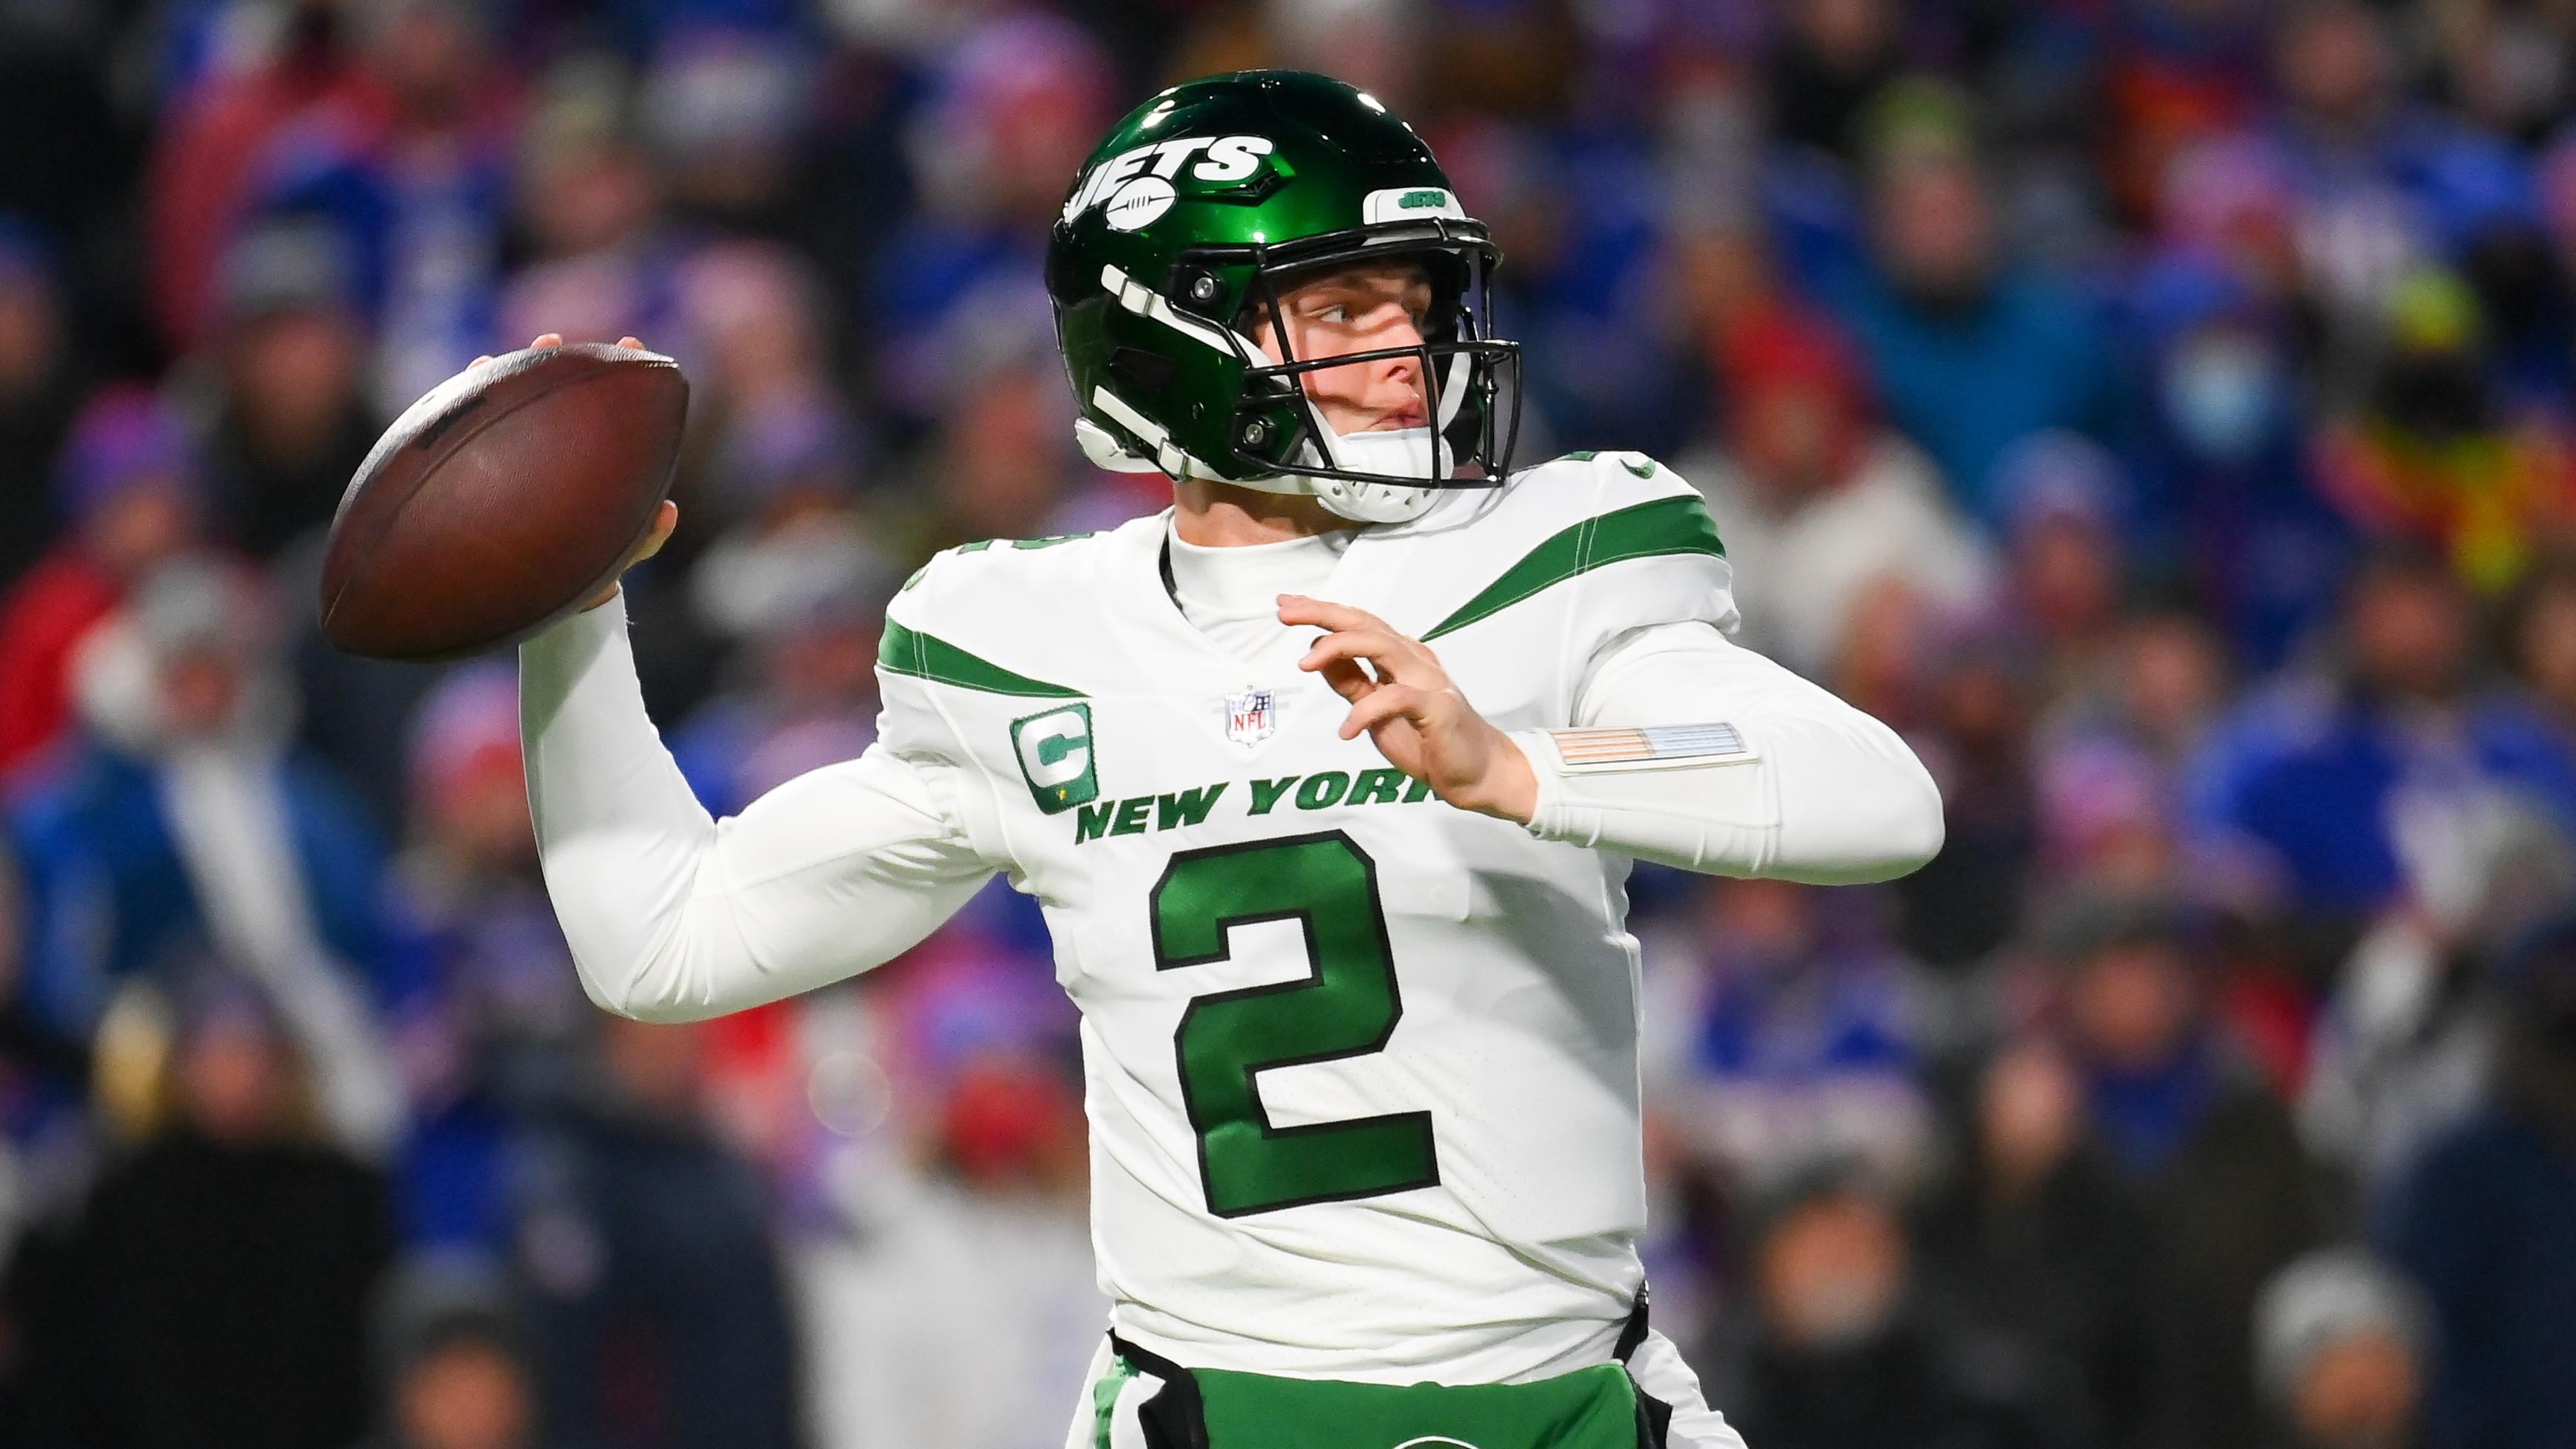 Jan 9, 2022; Orchard Park, New York, USA; New York Jets quarterback Zach Wilson (2) passes the ball against the Buffalo Bills during the first half at Highmark Stadium. Mandatory Credit: Rich Barnes-USA TODAY Sports / Rich Barnes-USA TODAY Sports